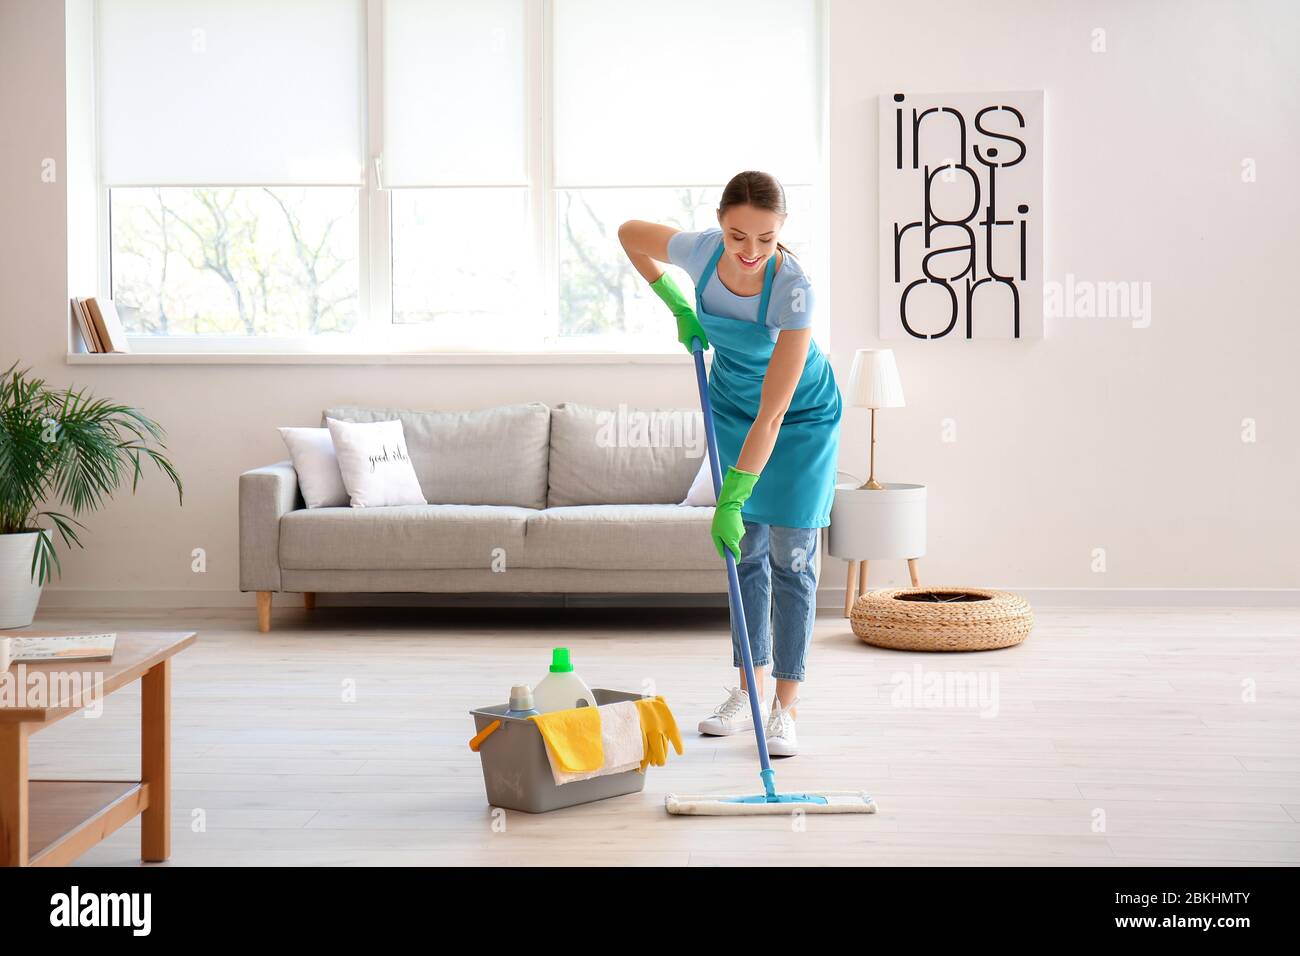 Young woman mopping floor in room Stock Photo